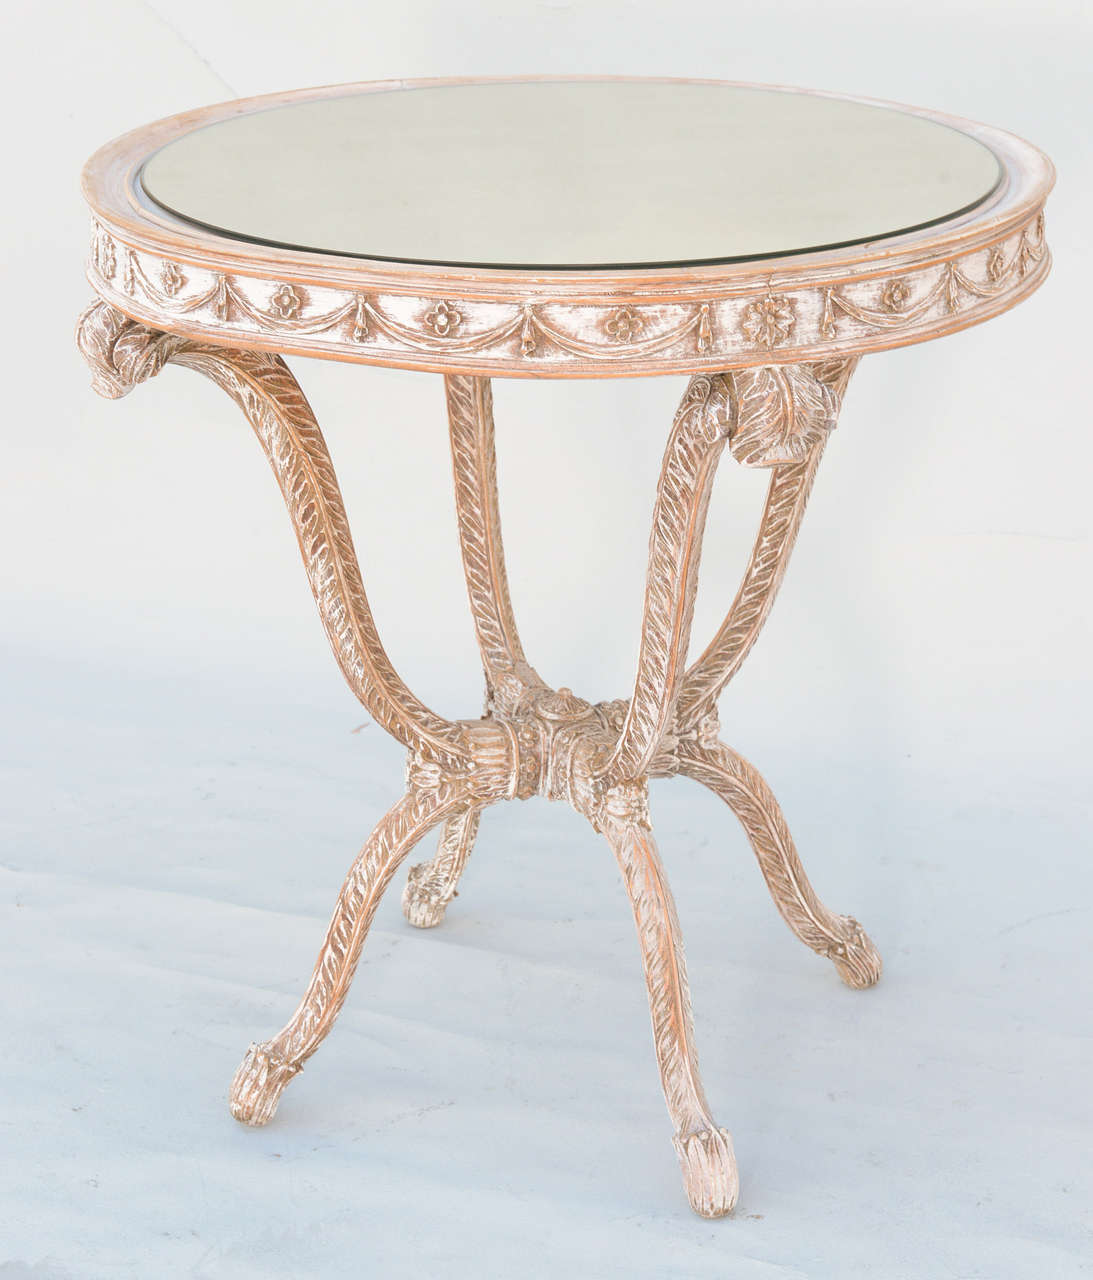 Round table, with pickled finish, having a round mirrored top, its apron carved with rosettes and swags, raised on plume-form legs.

Stock ID: D3490